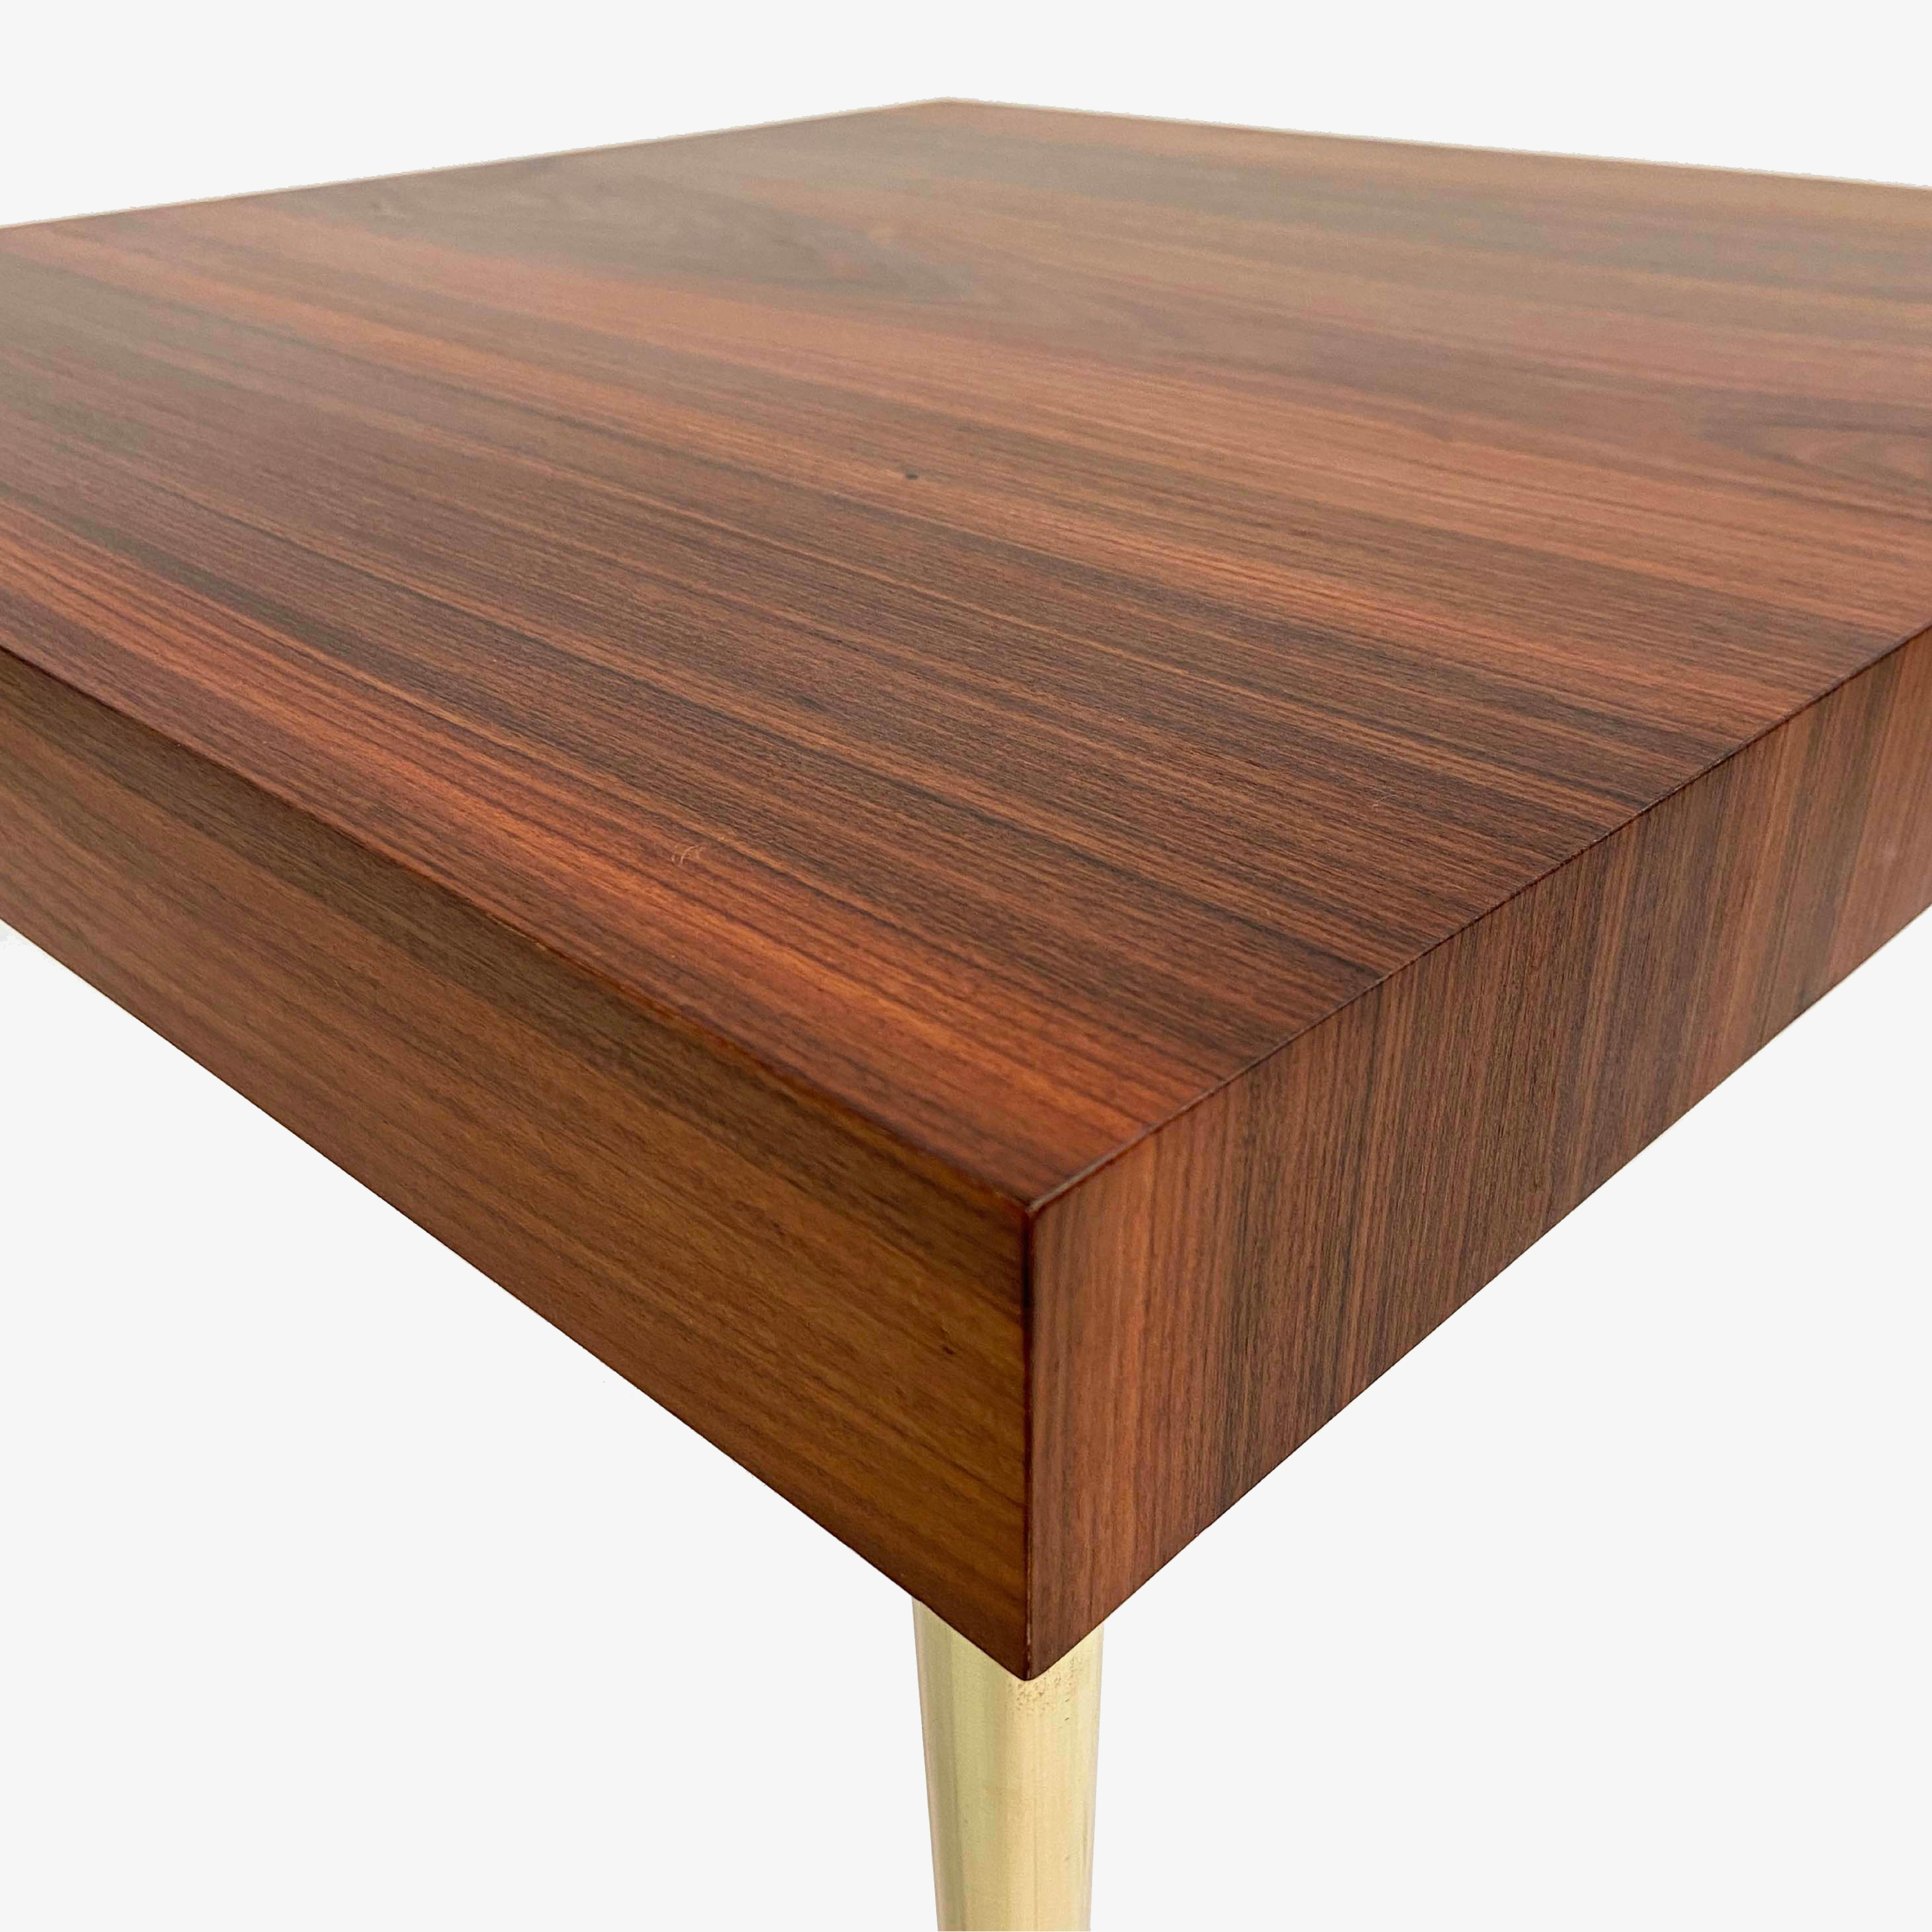 This occasional table constructed in rosewood with a wonderful grain, was designed with the proportions of the Mid-Century, celebrating an era of design that remains ever so popular today. It's been manufactured in-house by Montage with tapered